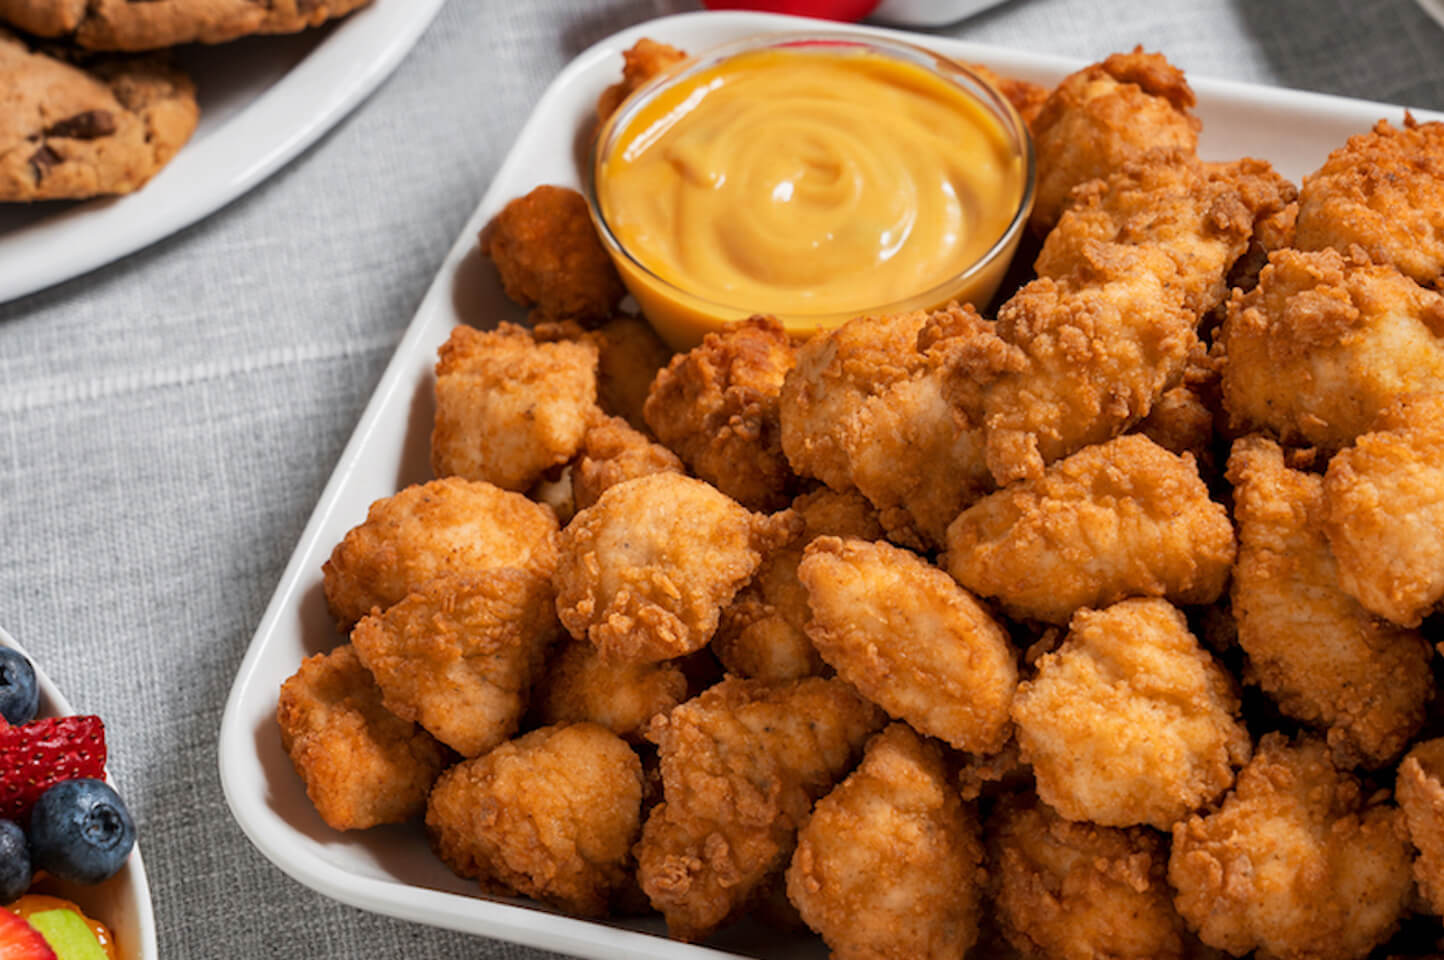 Tray of Chick fil A Nuggets on Table with Chick-fil-A Sauce